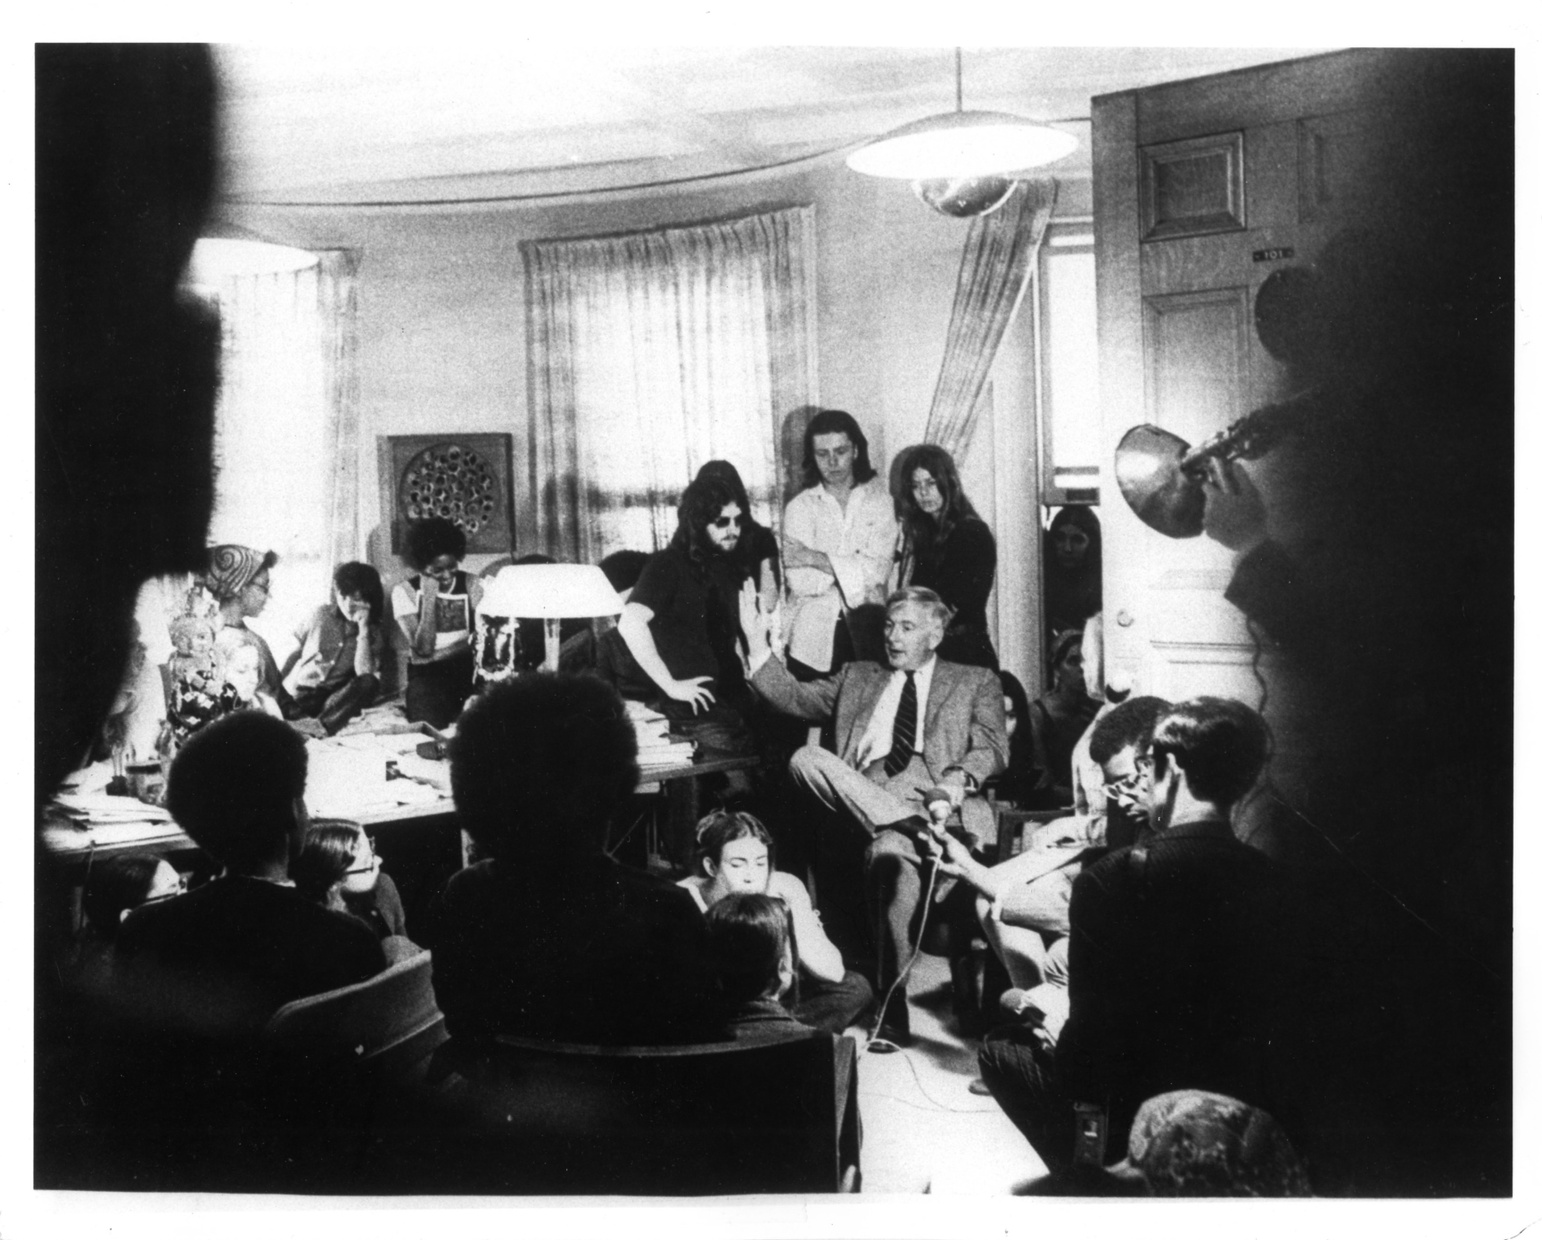 A black and white image of a group of light-skinned and dark-skinned young people in a room standing around an older light-skinned man seated in a chair with his right hand raised in oratory gesture.